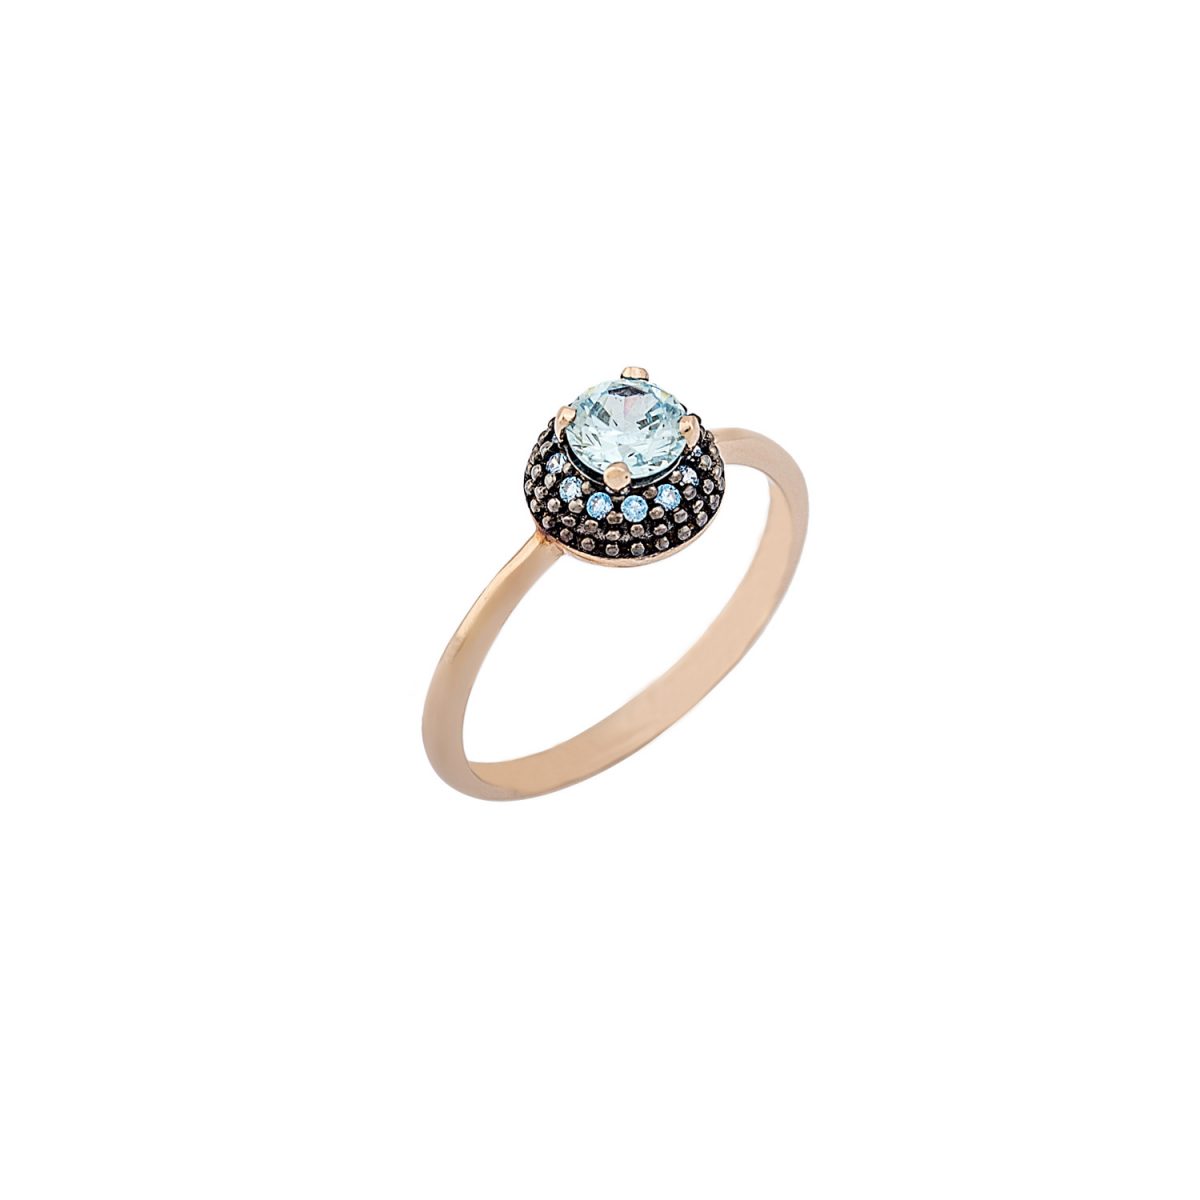 Ring with blue stones